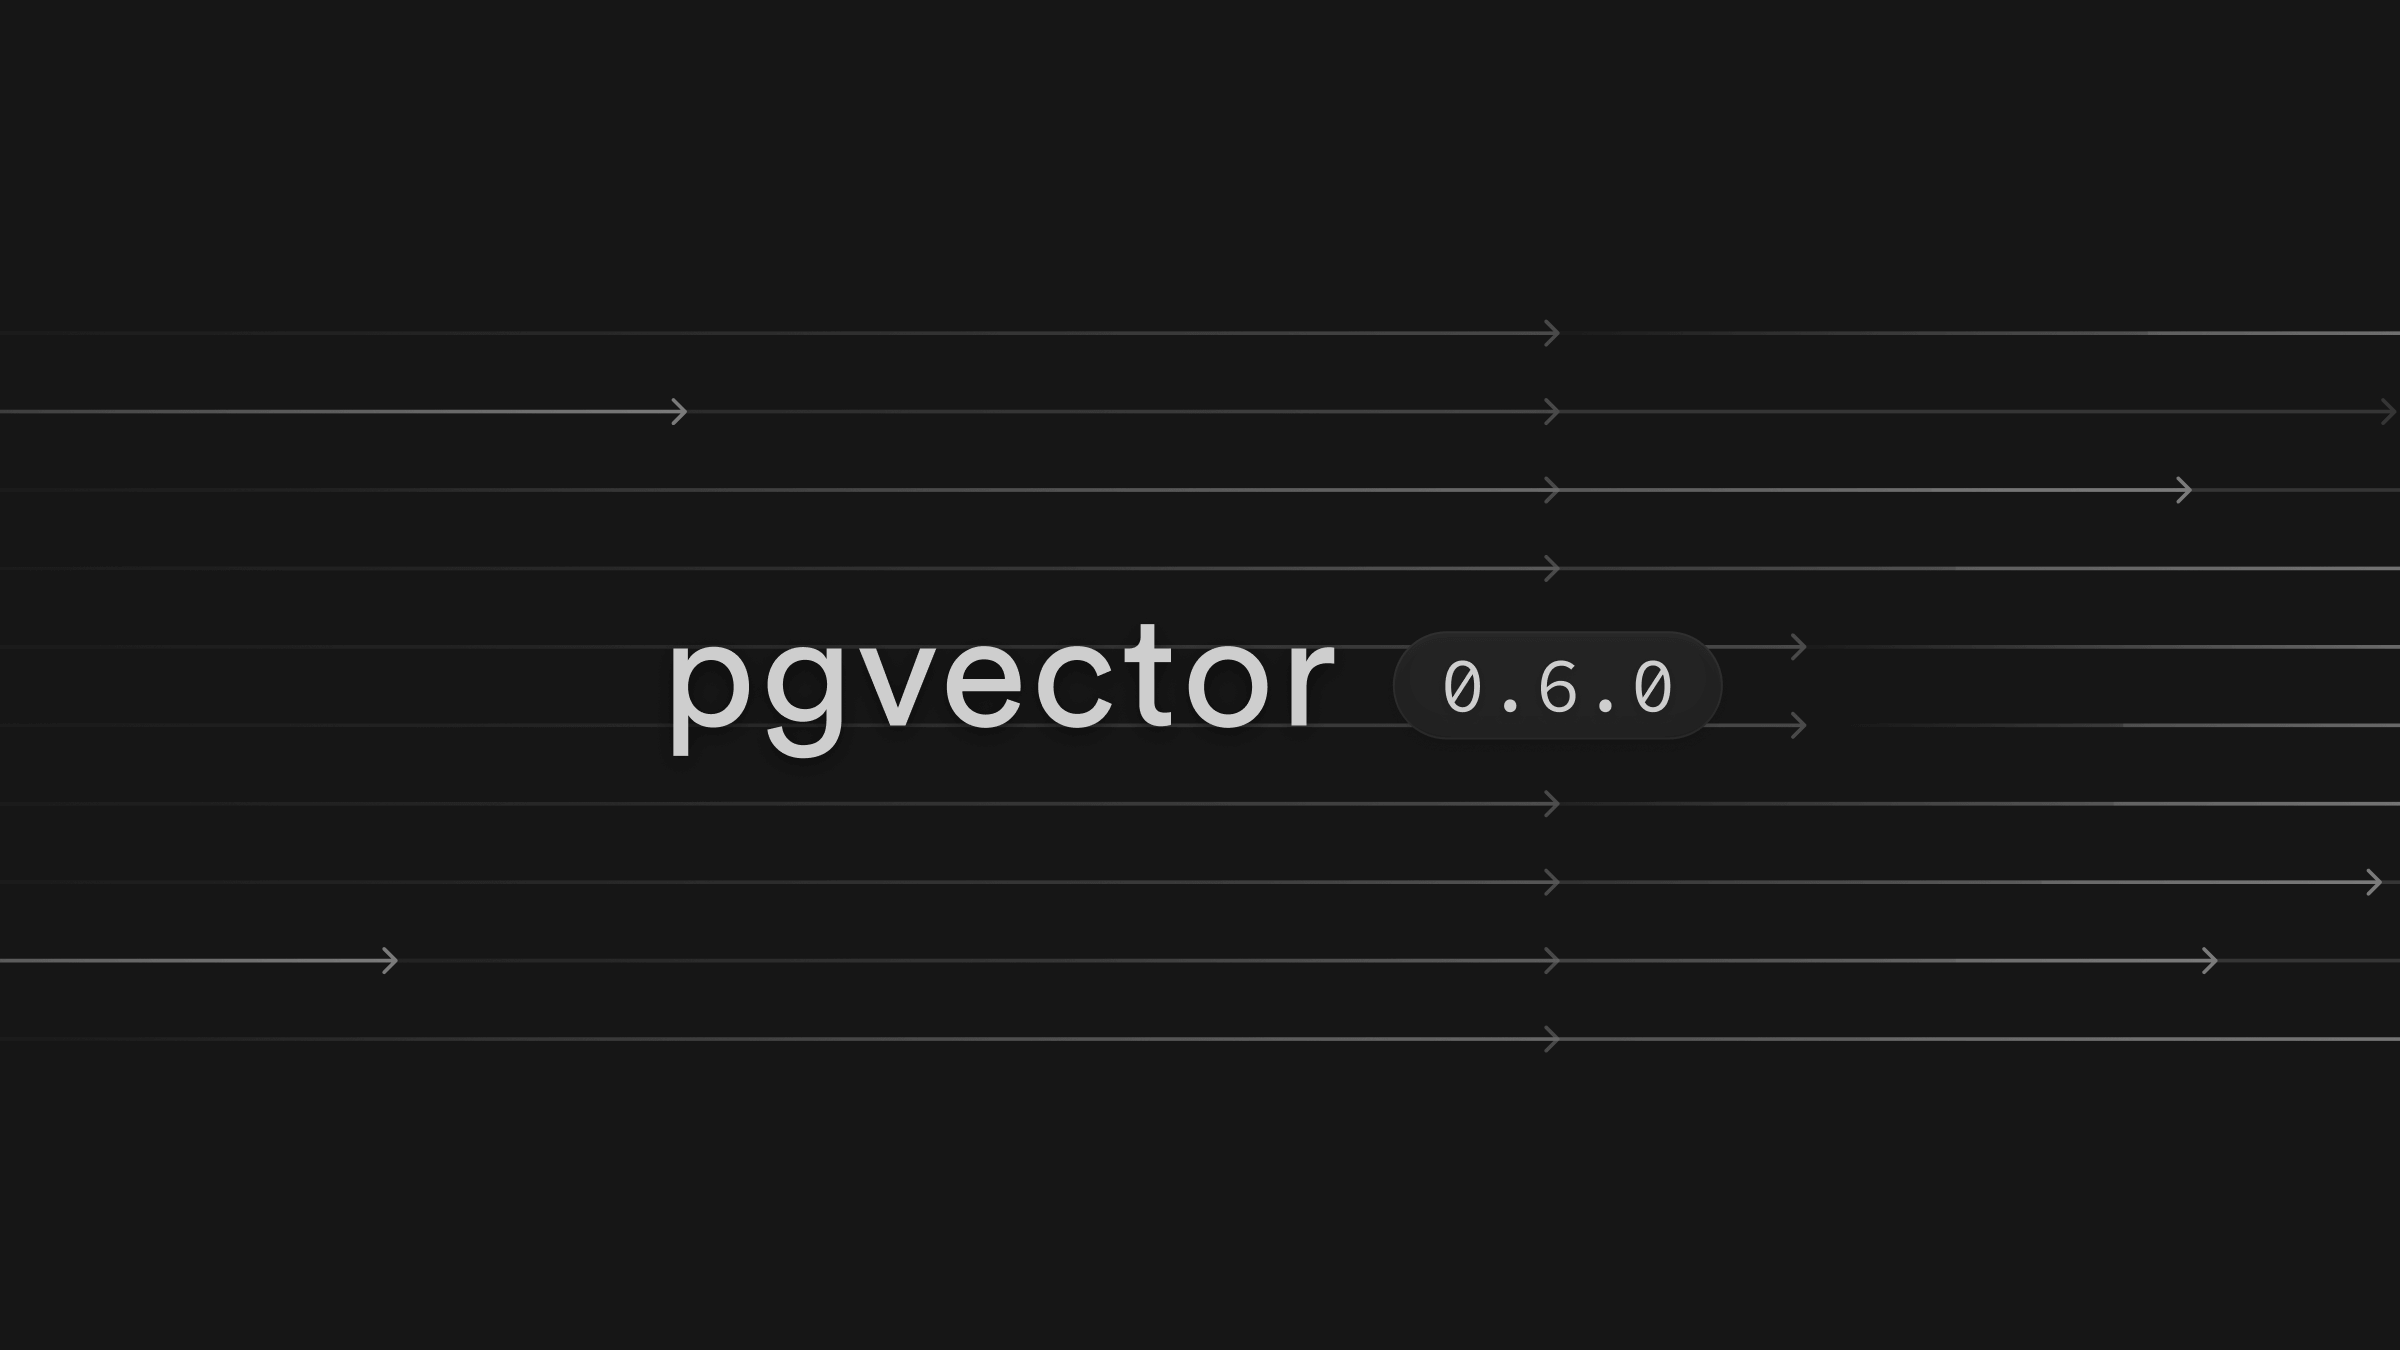 pgvector 0.6.0: 30x faster with parallel index builds